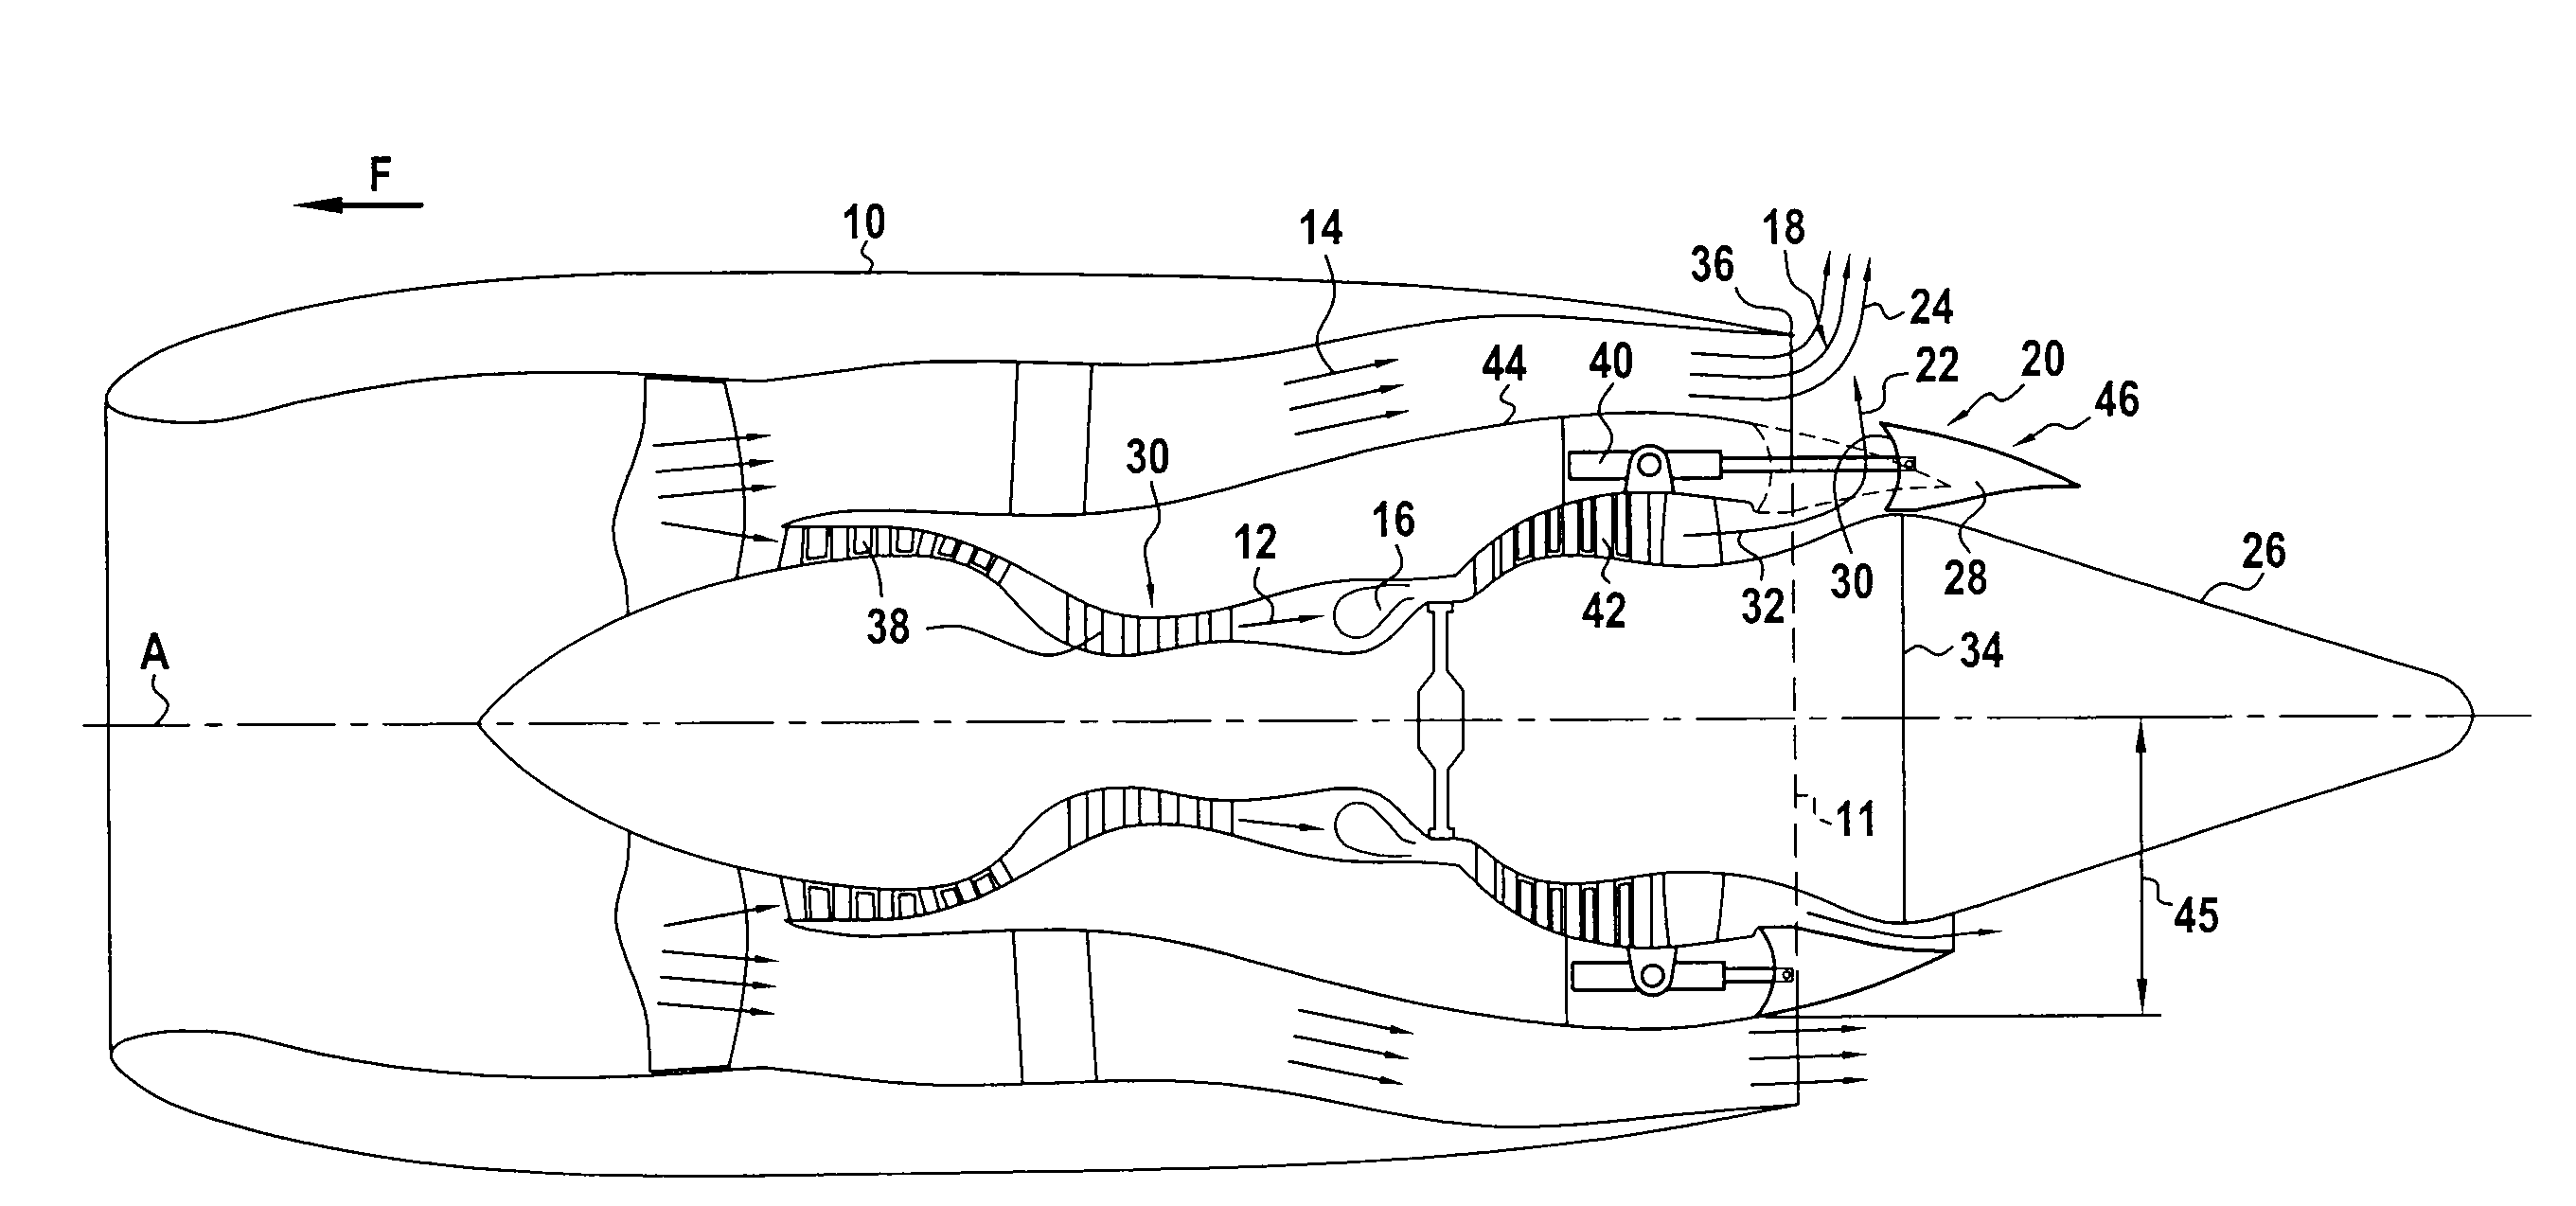 By-pass turbojet including a thrust reverser